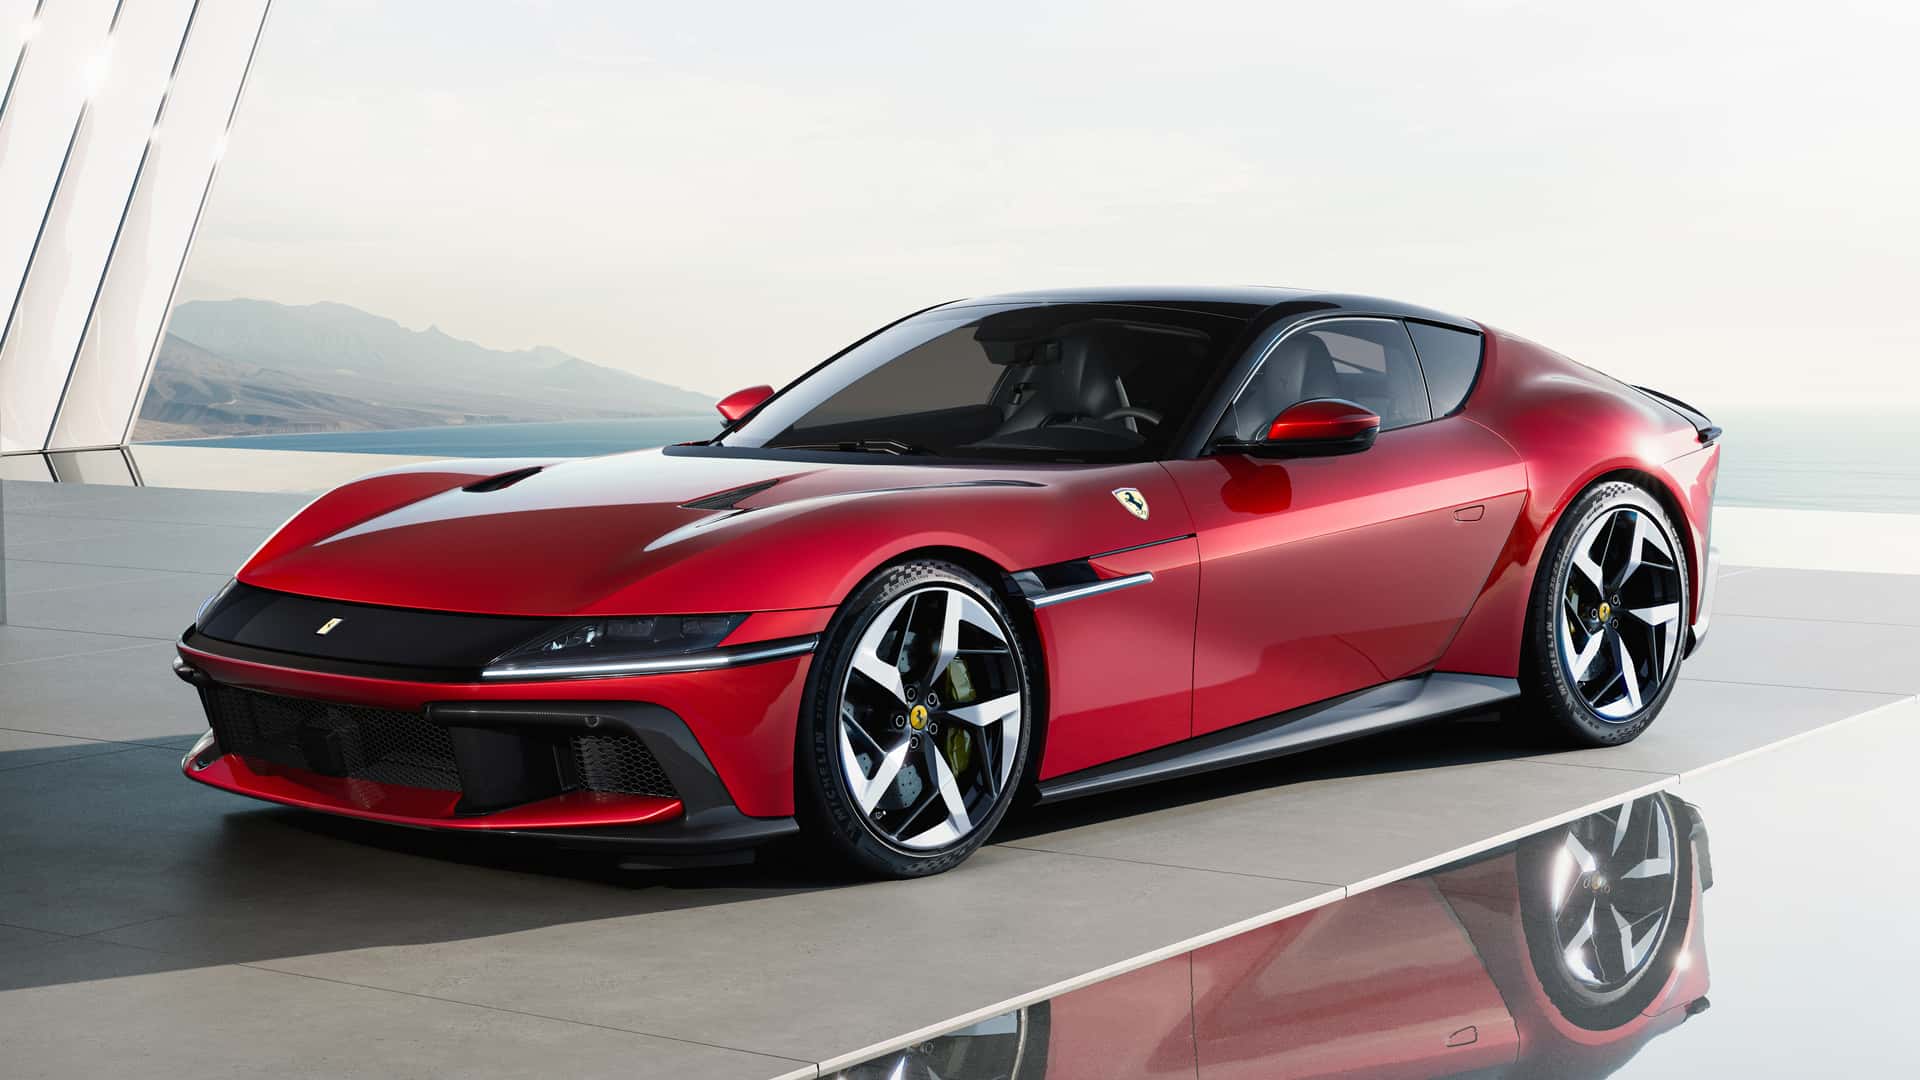 Read more about the article The new Ferrari 12Cilindri delivers 830 hp the old-fashioned way